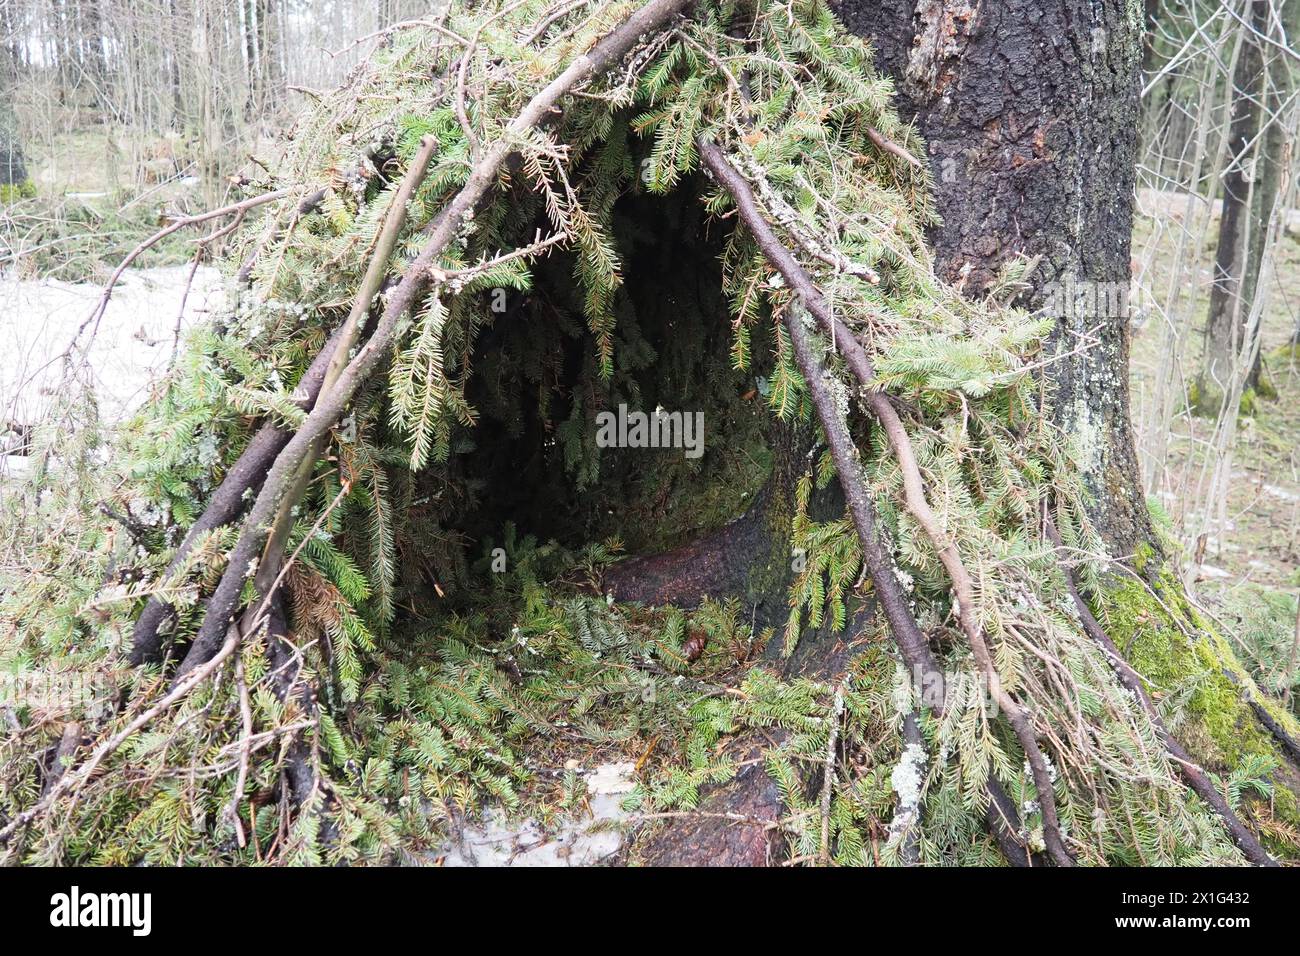 A hut made of spruce branches in the Karelian forest. A hut is the simplest light shelter. It is a structure made using weaving technologies from pole Stock Photo